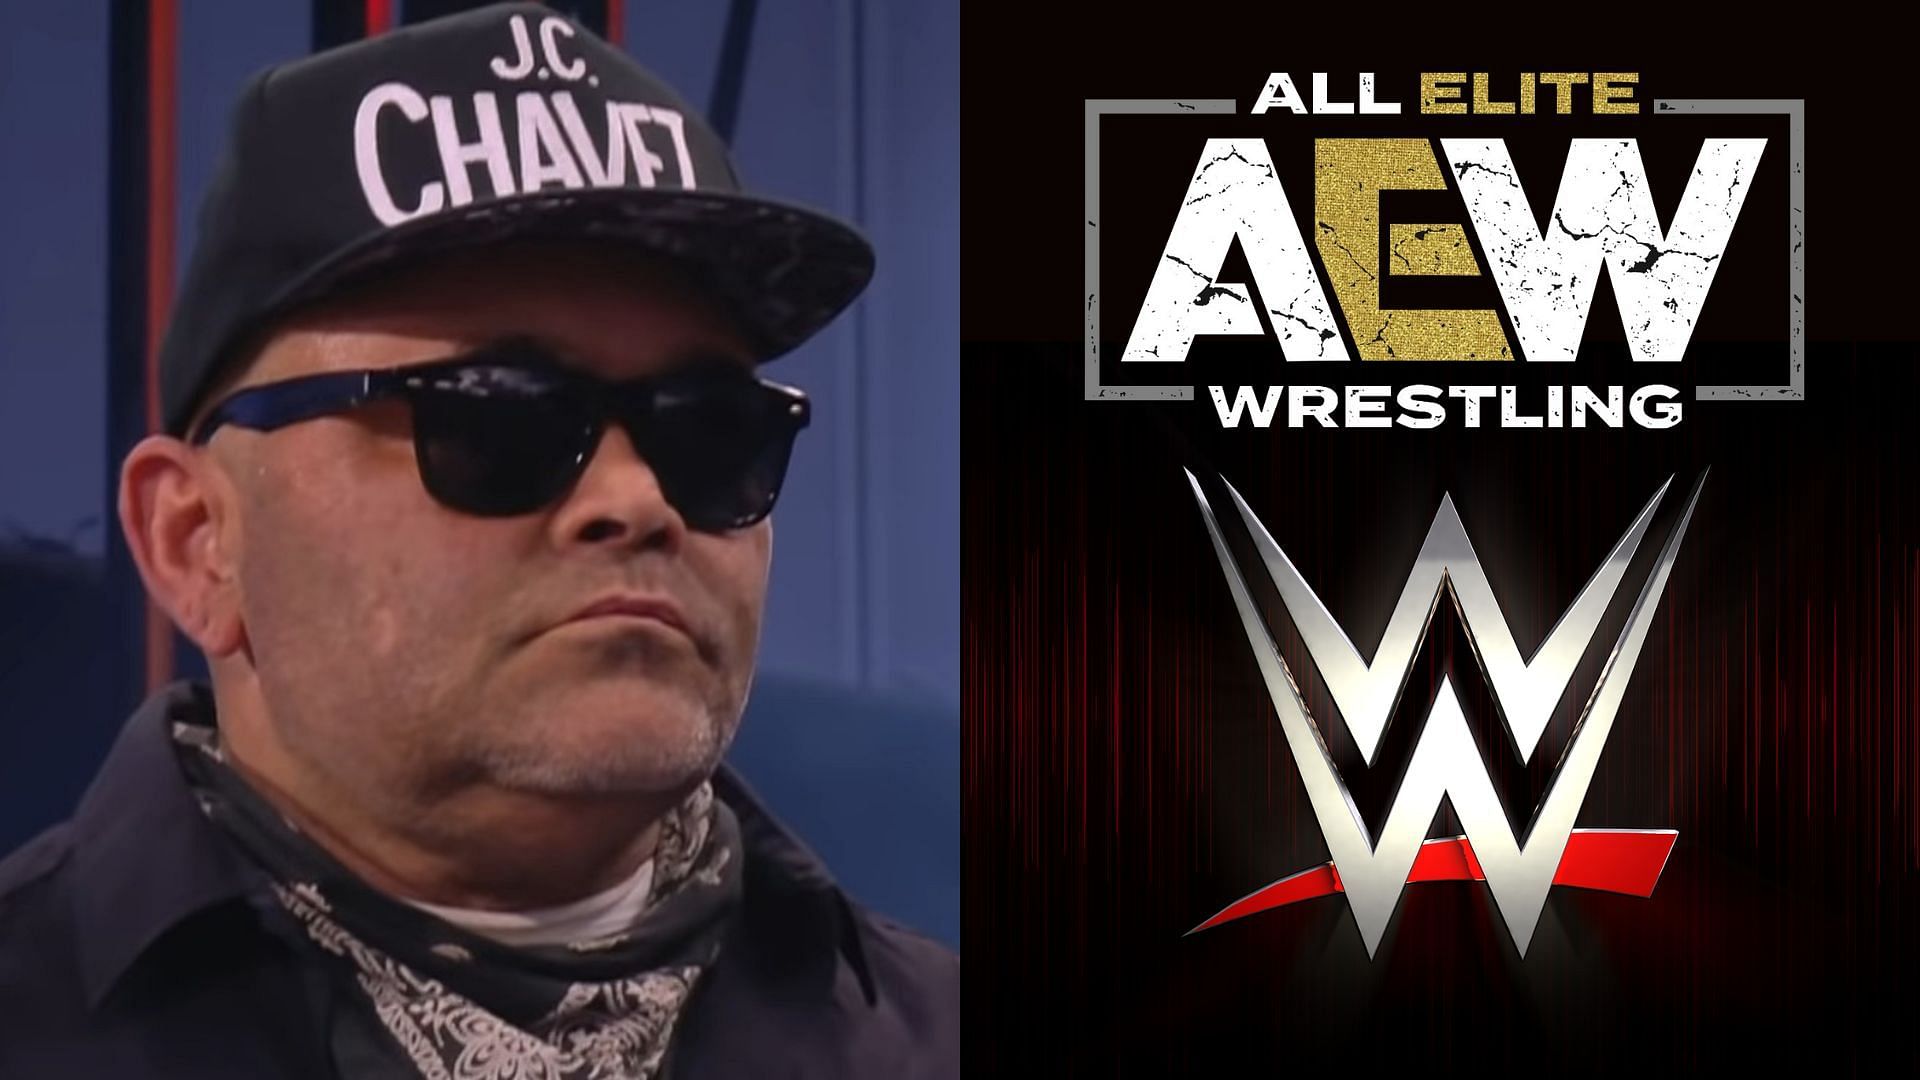 Konnan (left), AEW and WWE logo (right)